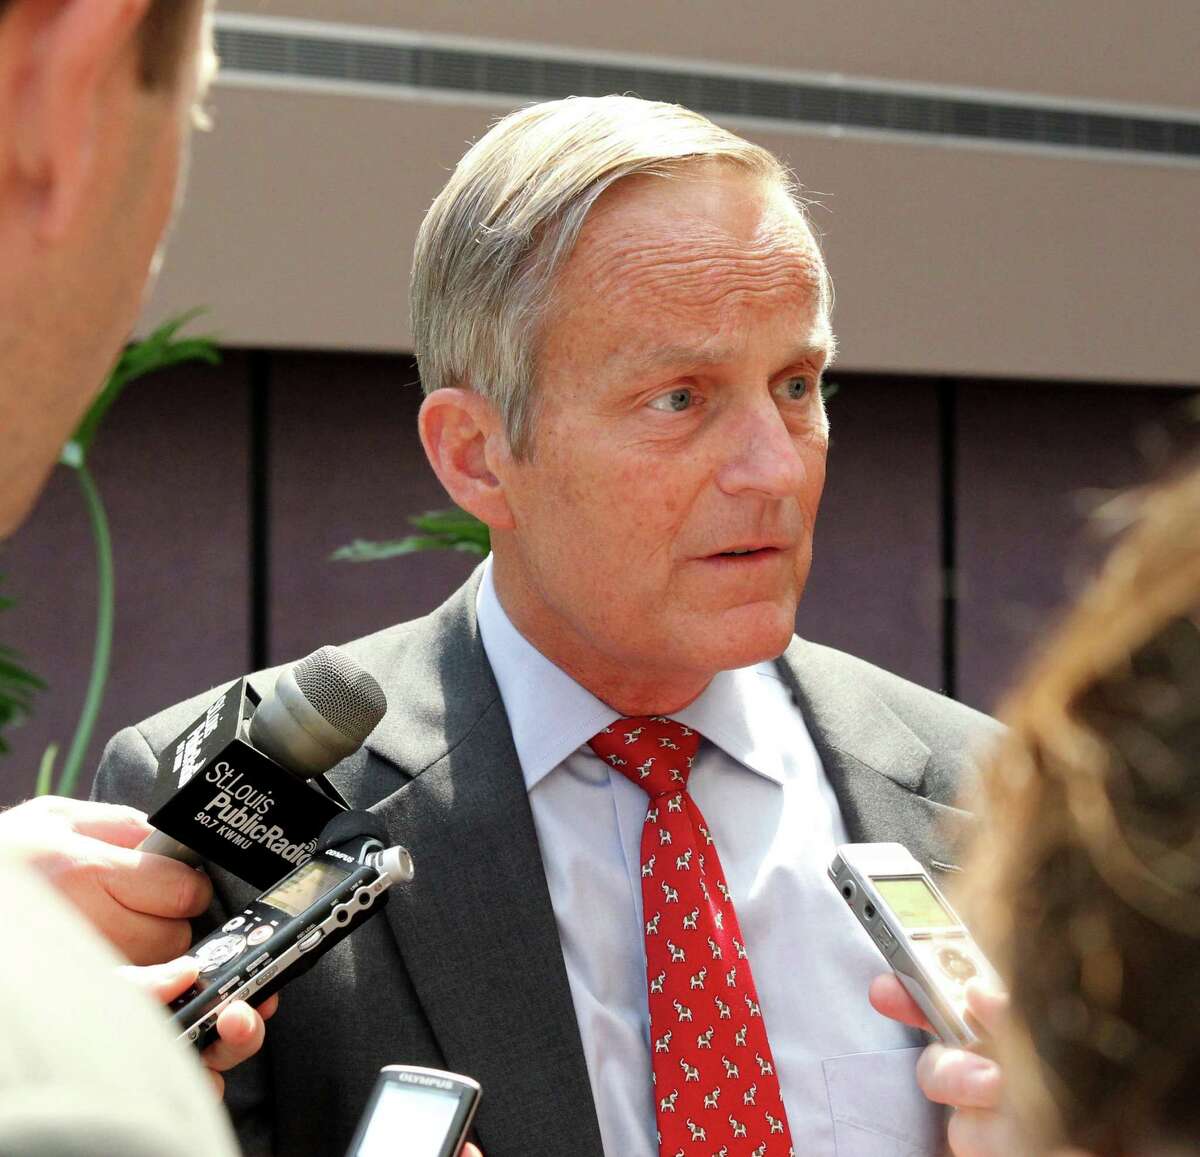 Readers continue to weigh in on the controversy created by Republican Todd Akin when he referred to “legitimate rape,” a comment that led officials from his own party to demand he withdraw from the U.S. Senate race in Missouri.